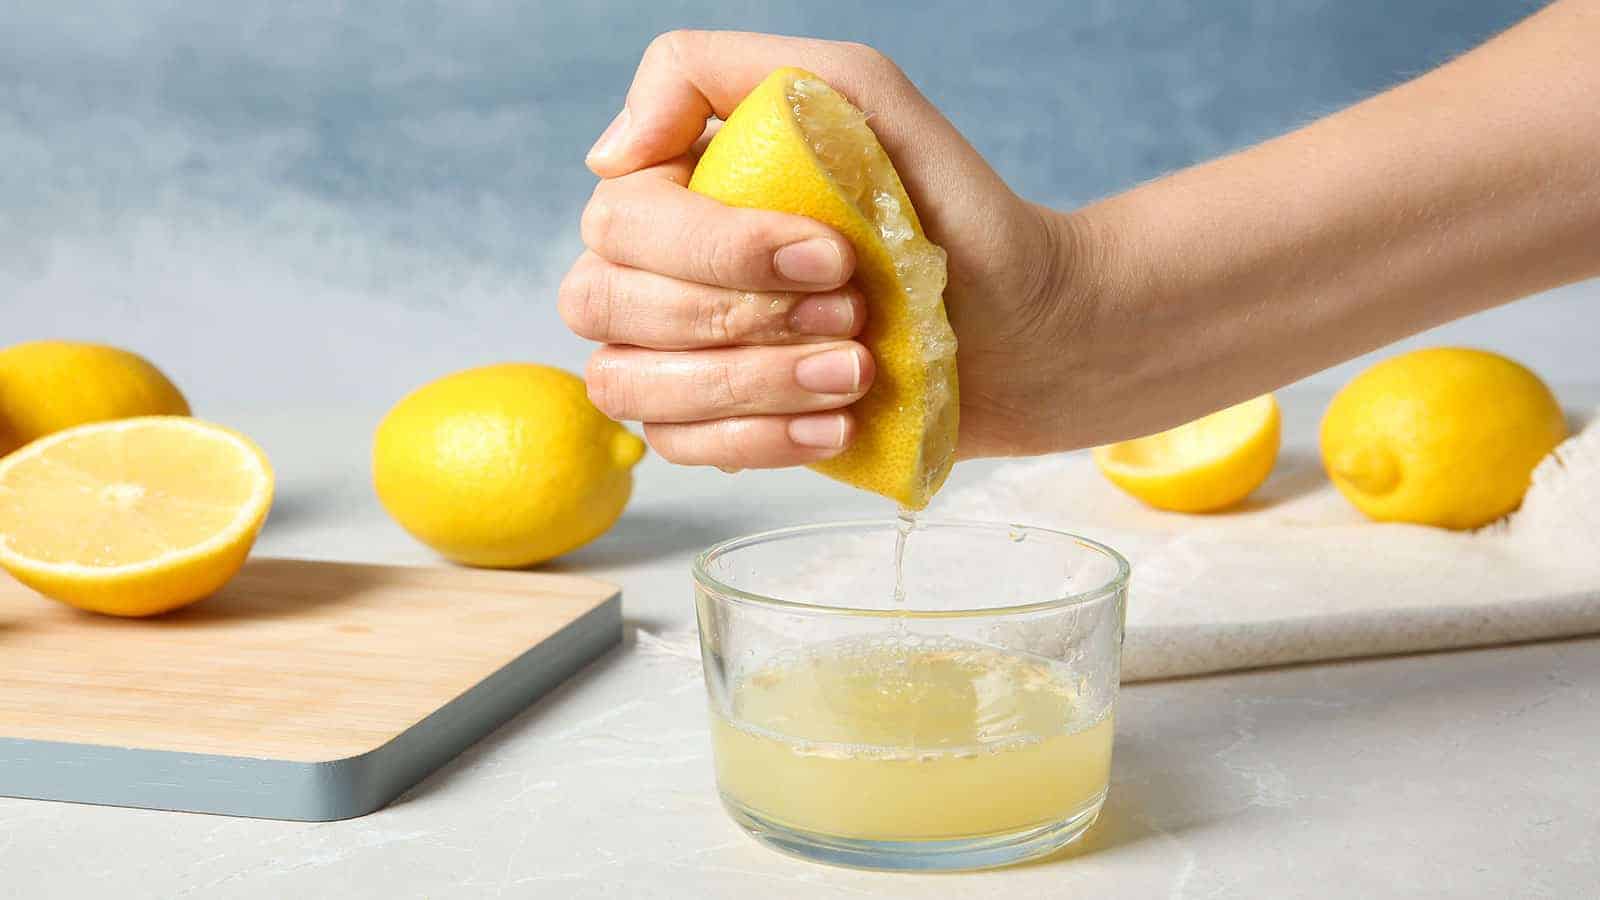 Science Explains 11 Benefits Of Drinking Lemon Water Every Day